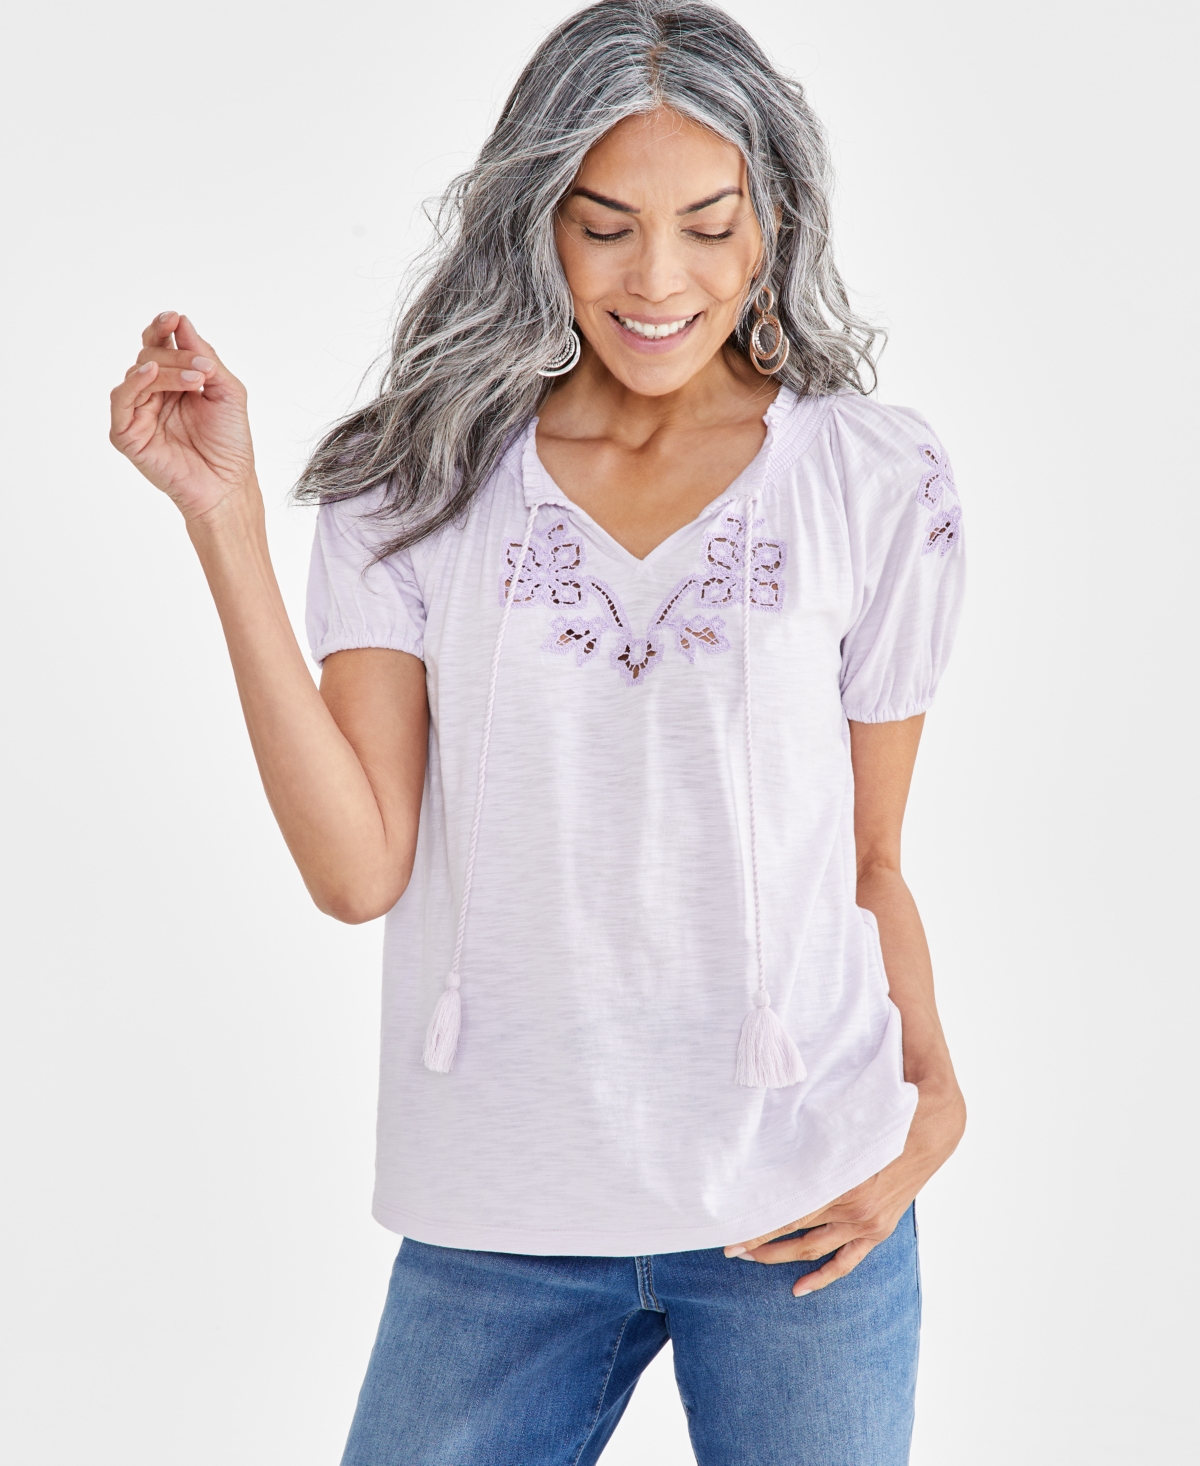 Women's Embroidery Vacay Top, Created for Macy's - Fuchsia